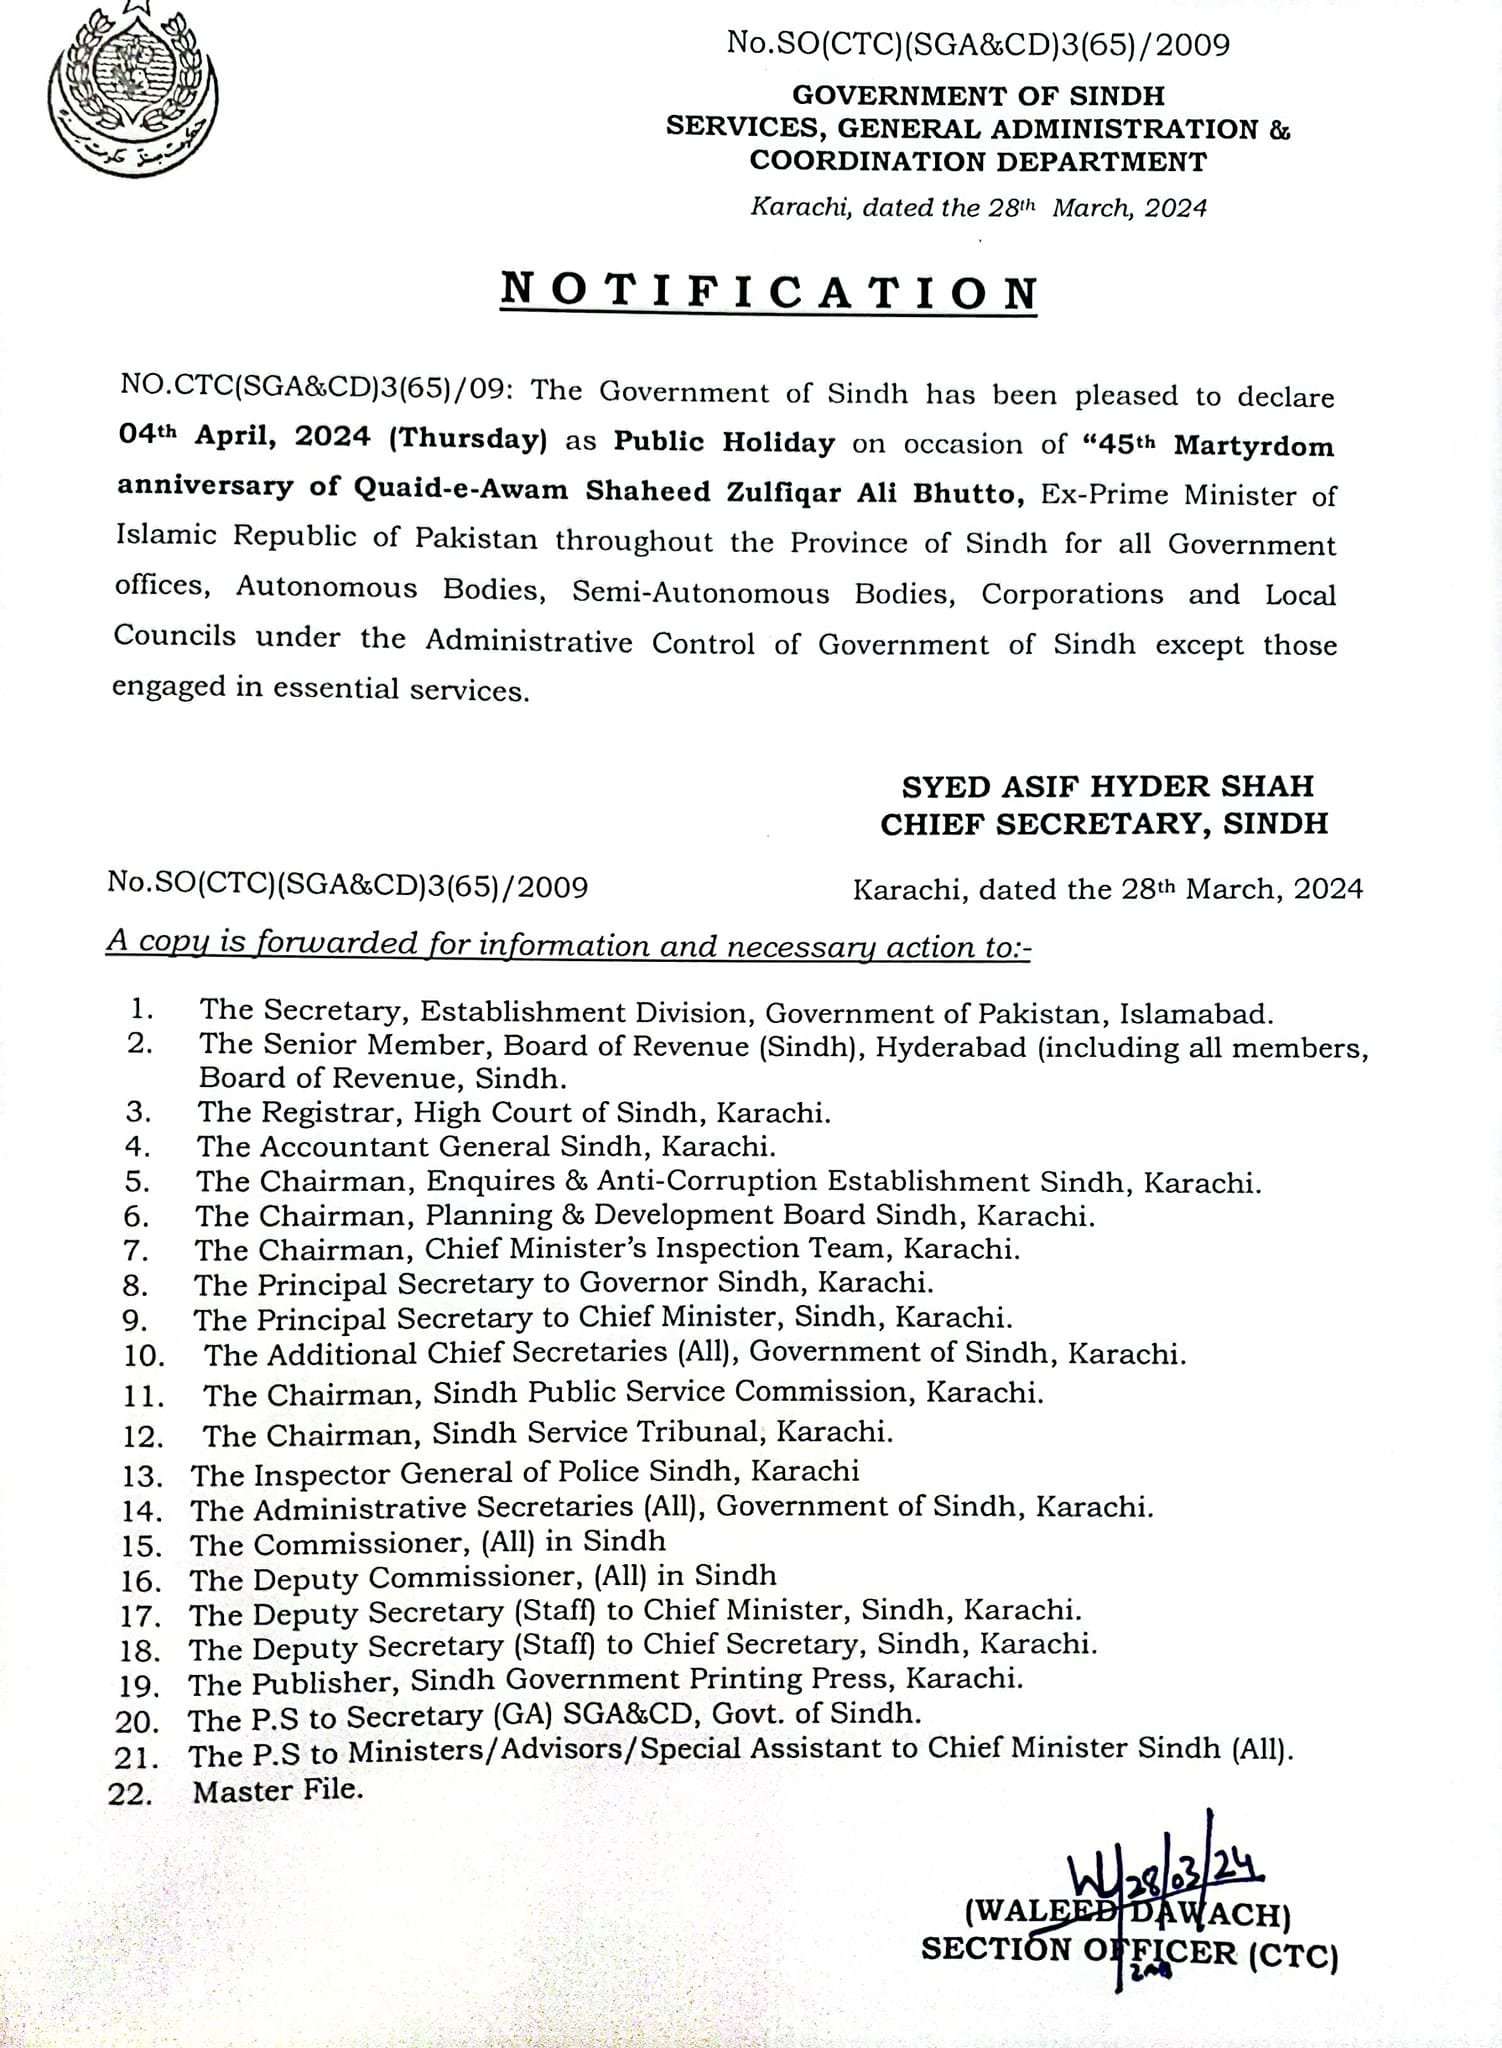 4th April 2024 Public Holiday Notification Download